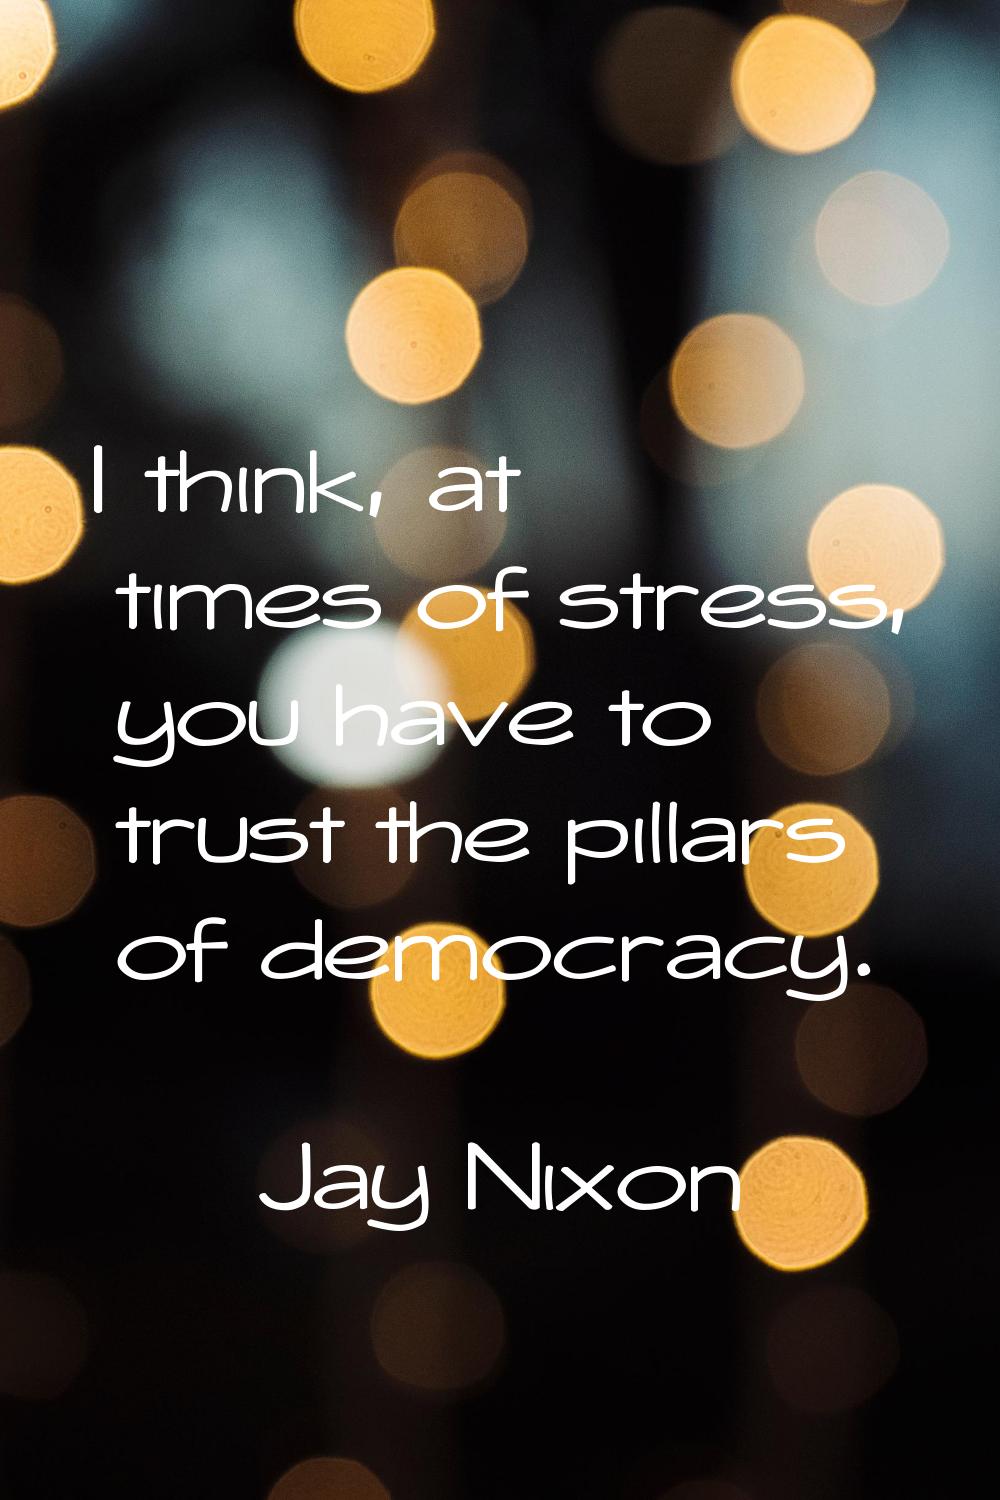 I think, at times of stress, you have to trust the pillars of democracy.